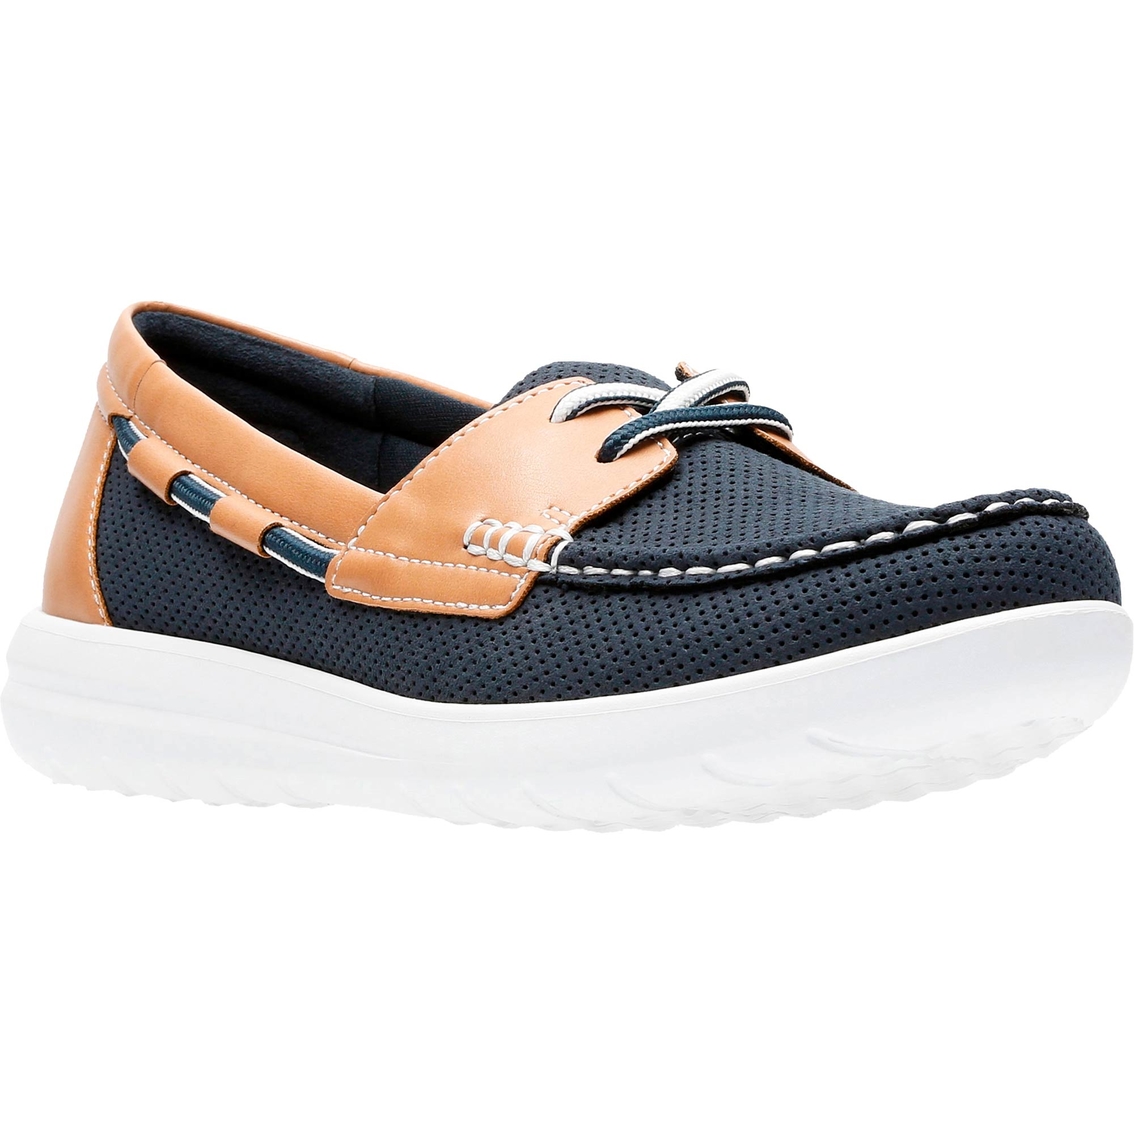 cloudsteppers by clarks boat shoes